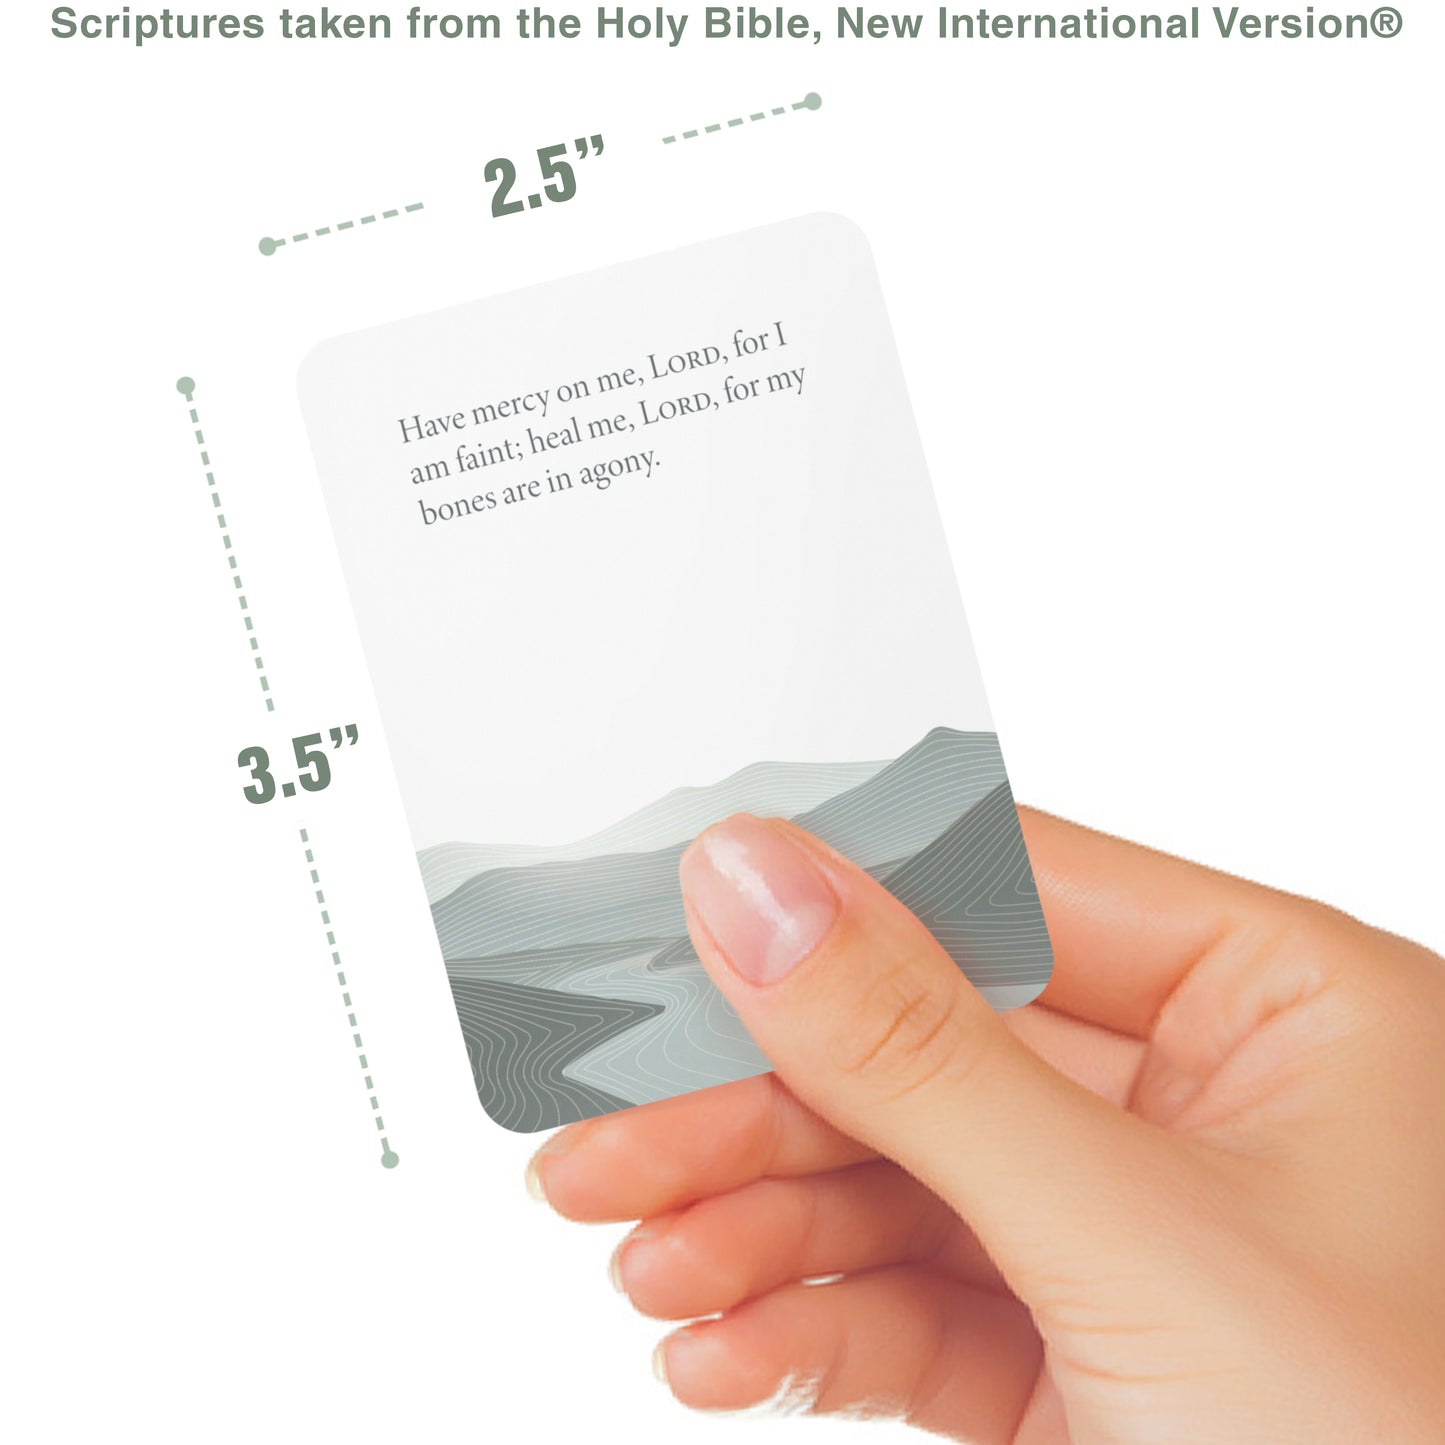 HIS GLORY - Bible Verse Cards to Inspire and Strengthen Your Faith